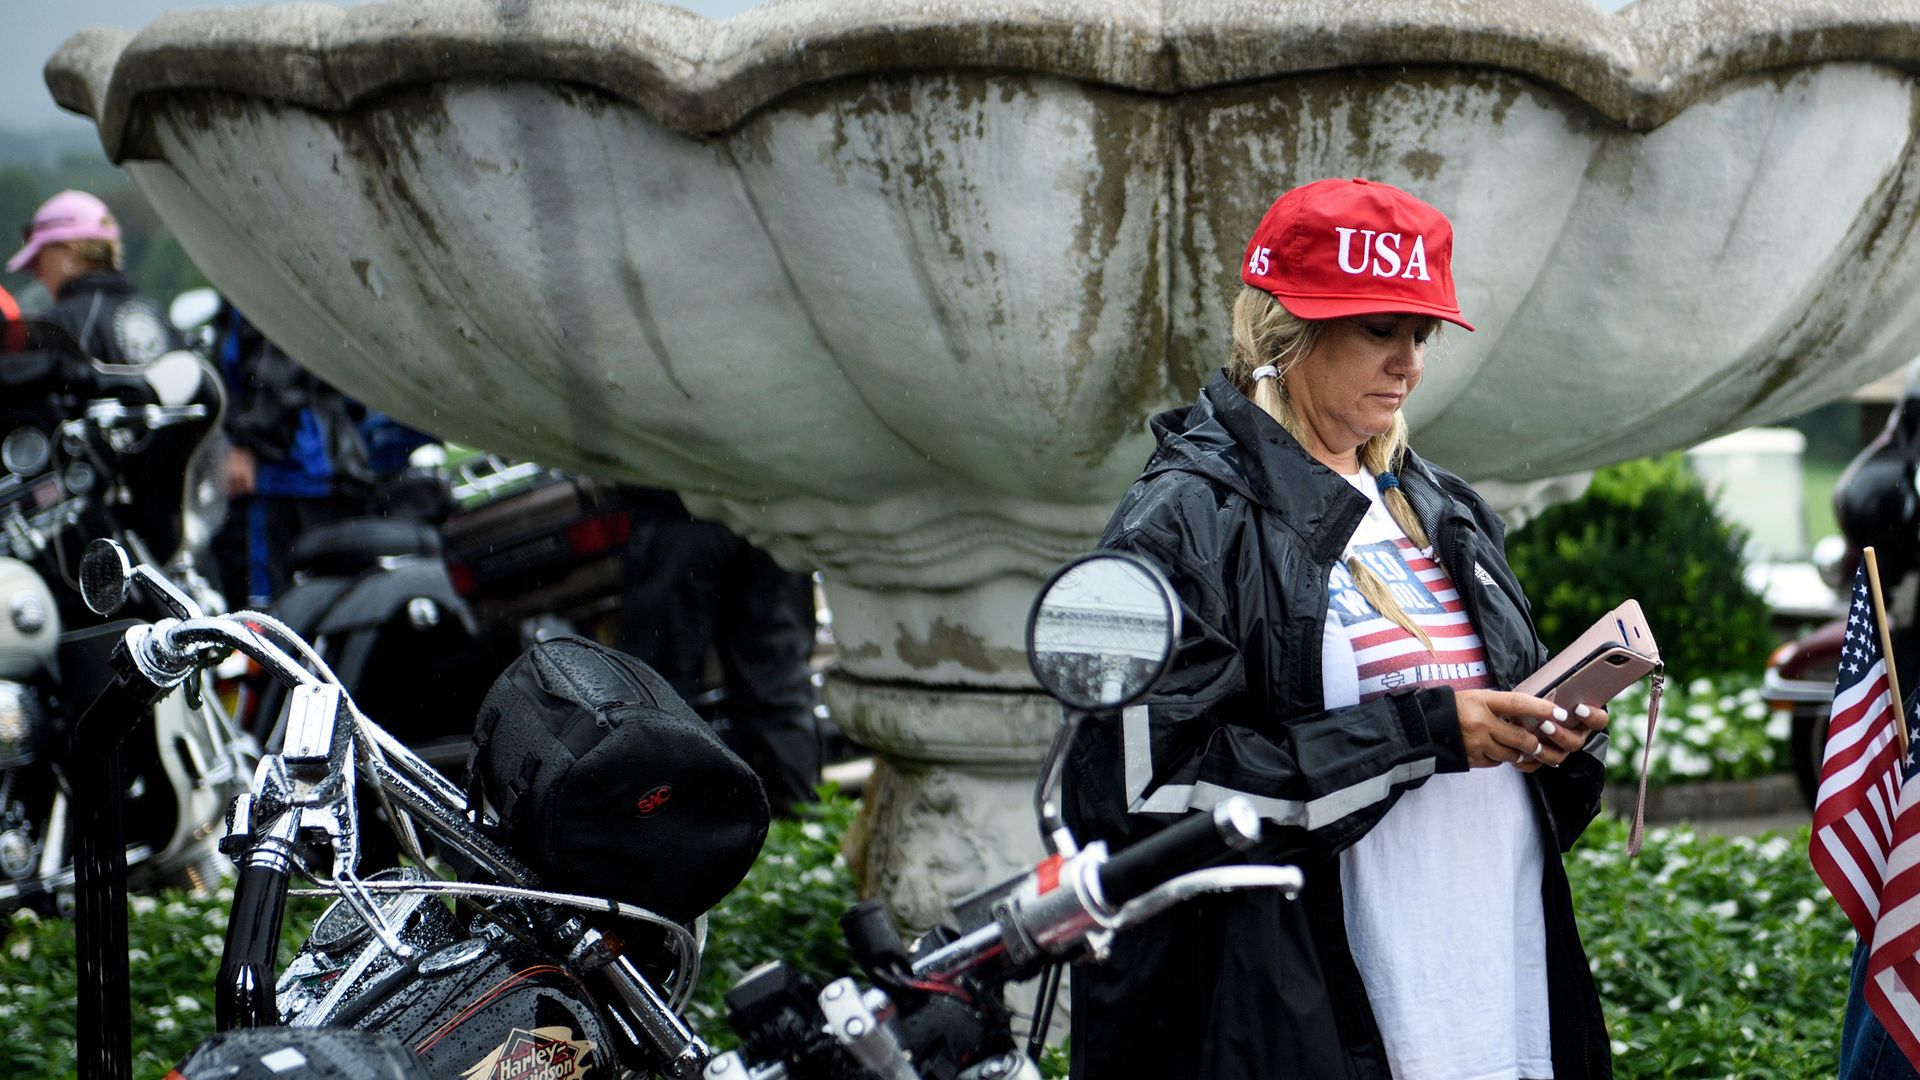 A woman wearing a USA hat looks at her phone.